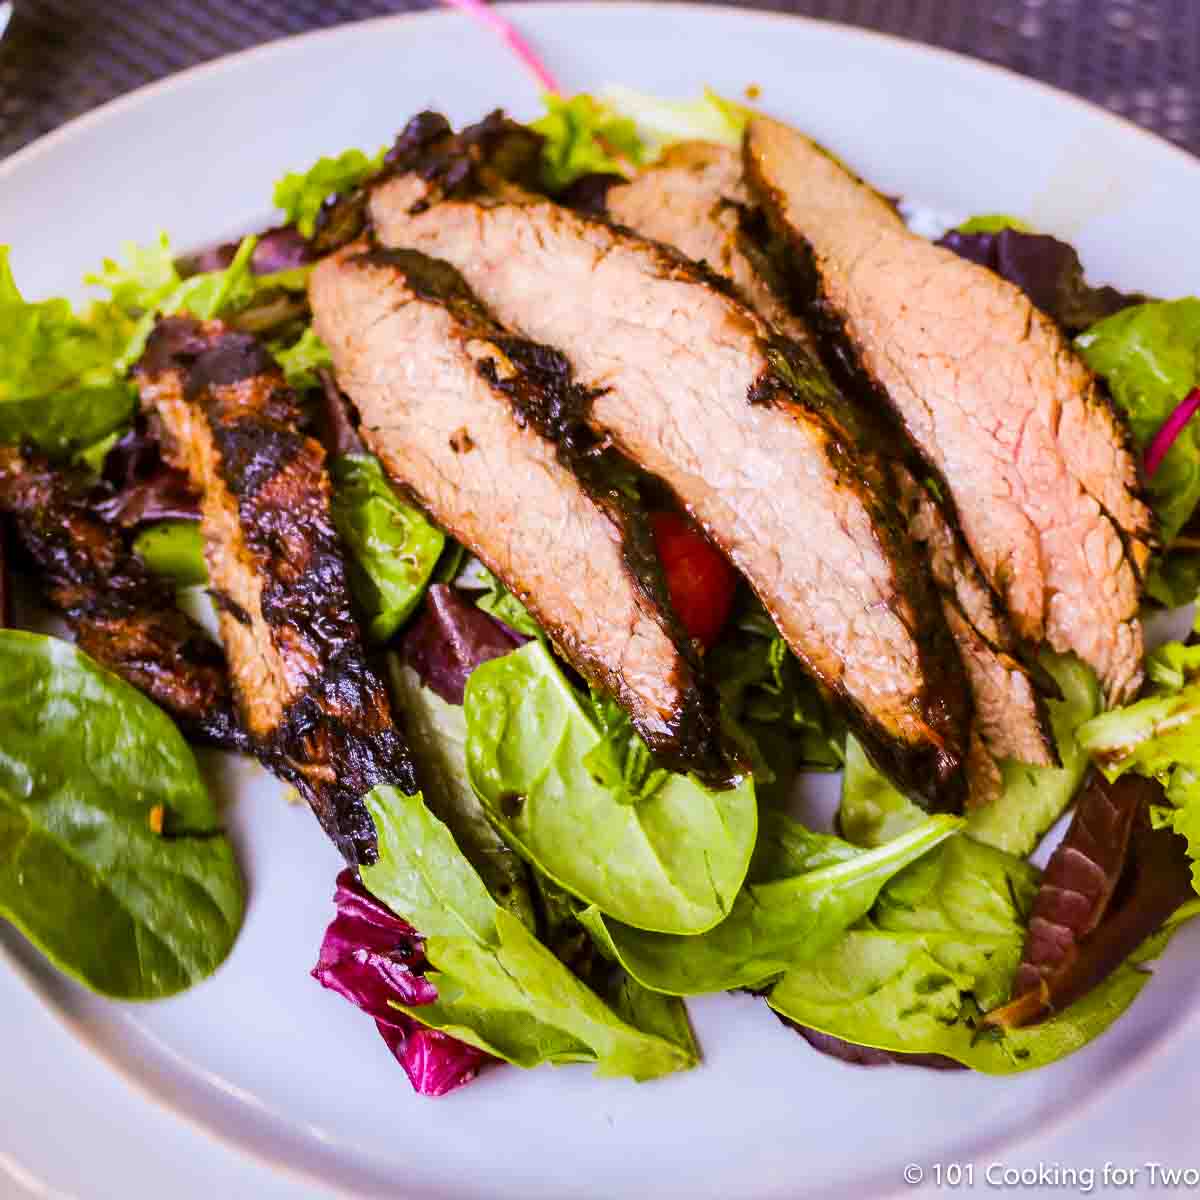 Easy Grilled Marinated Flank Steak - A License To Grill